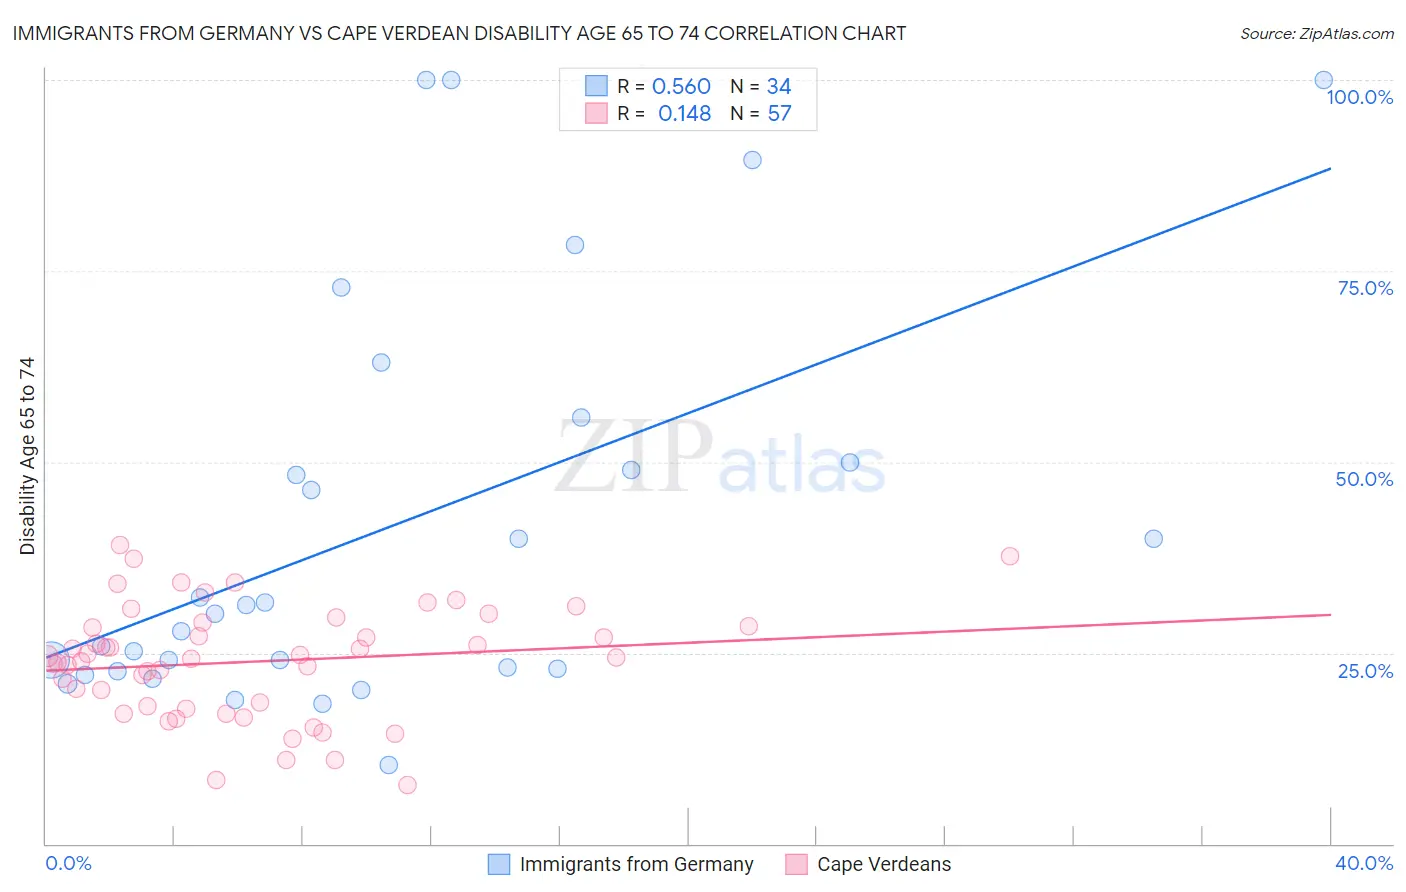 Immigrants from Germany vs Cape Verdean Disability Age 65 to 74